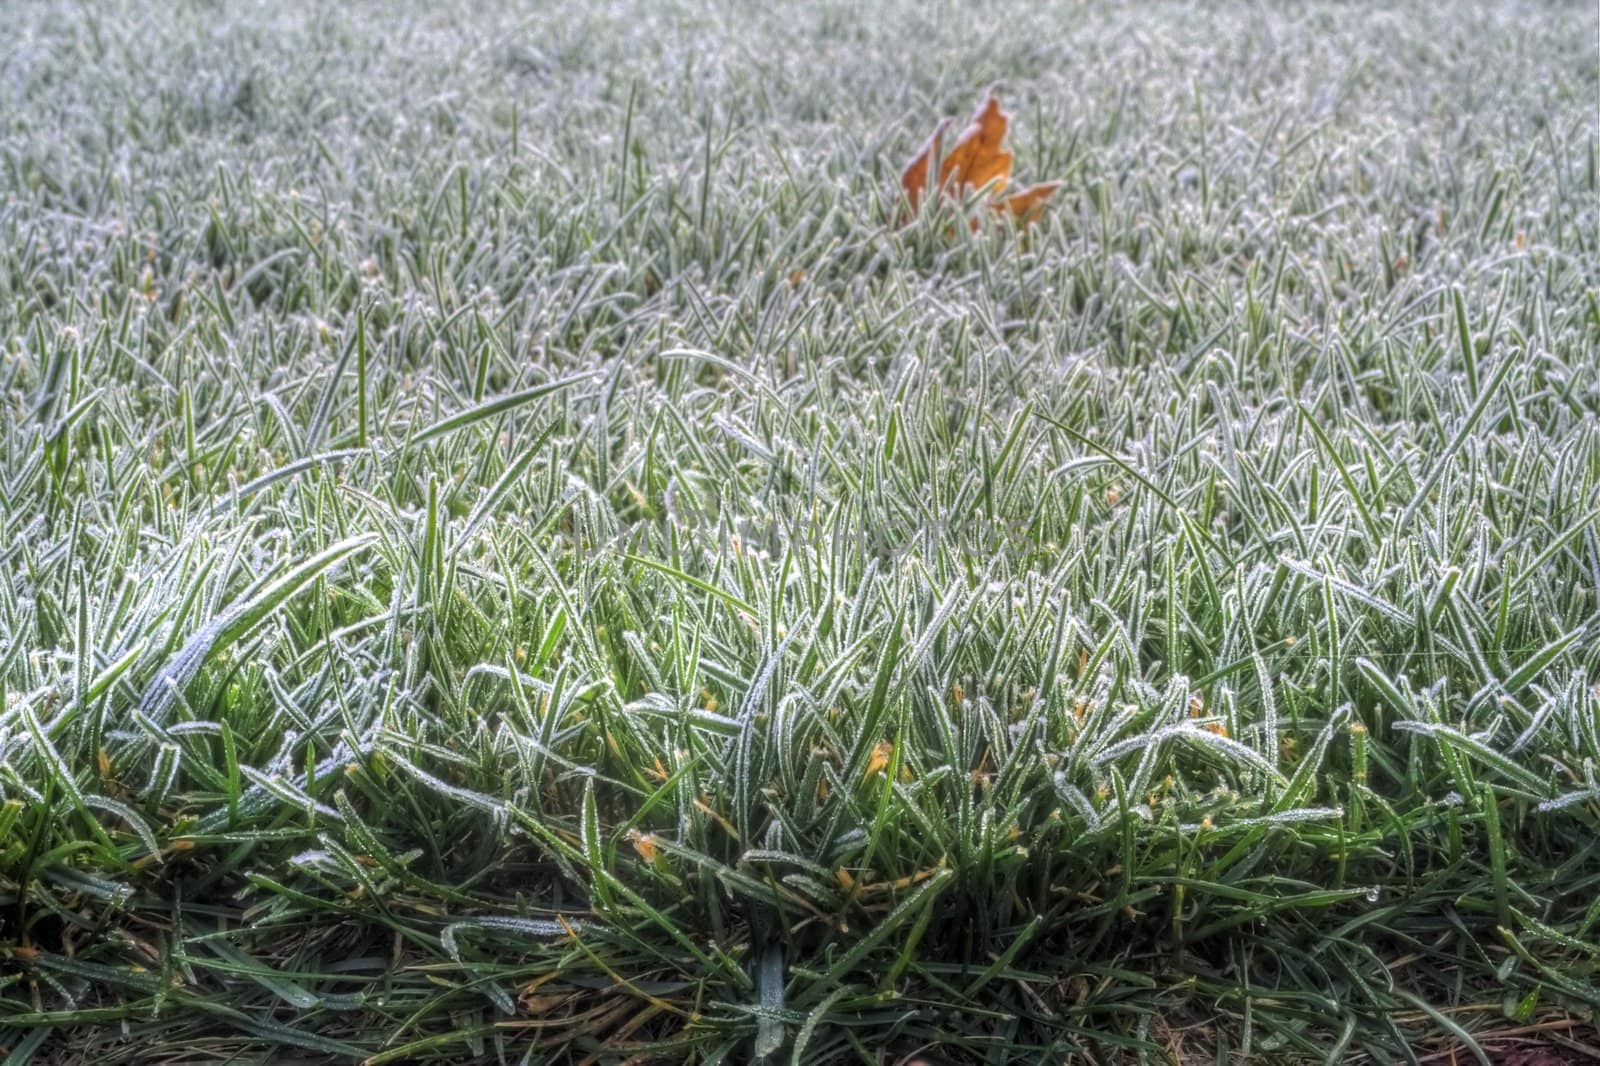 Blades of grass covered in the morning frost.